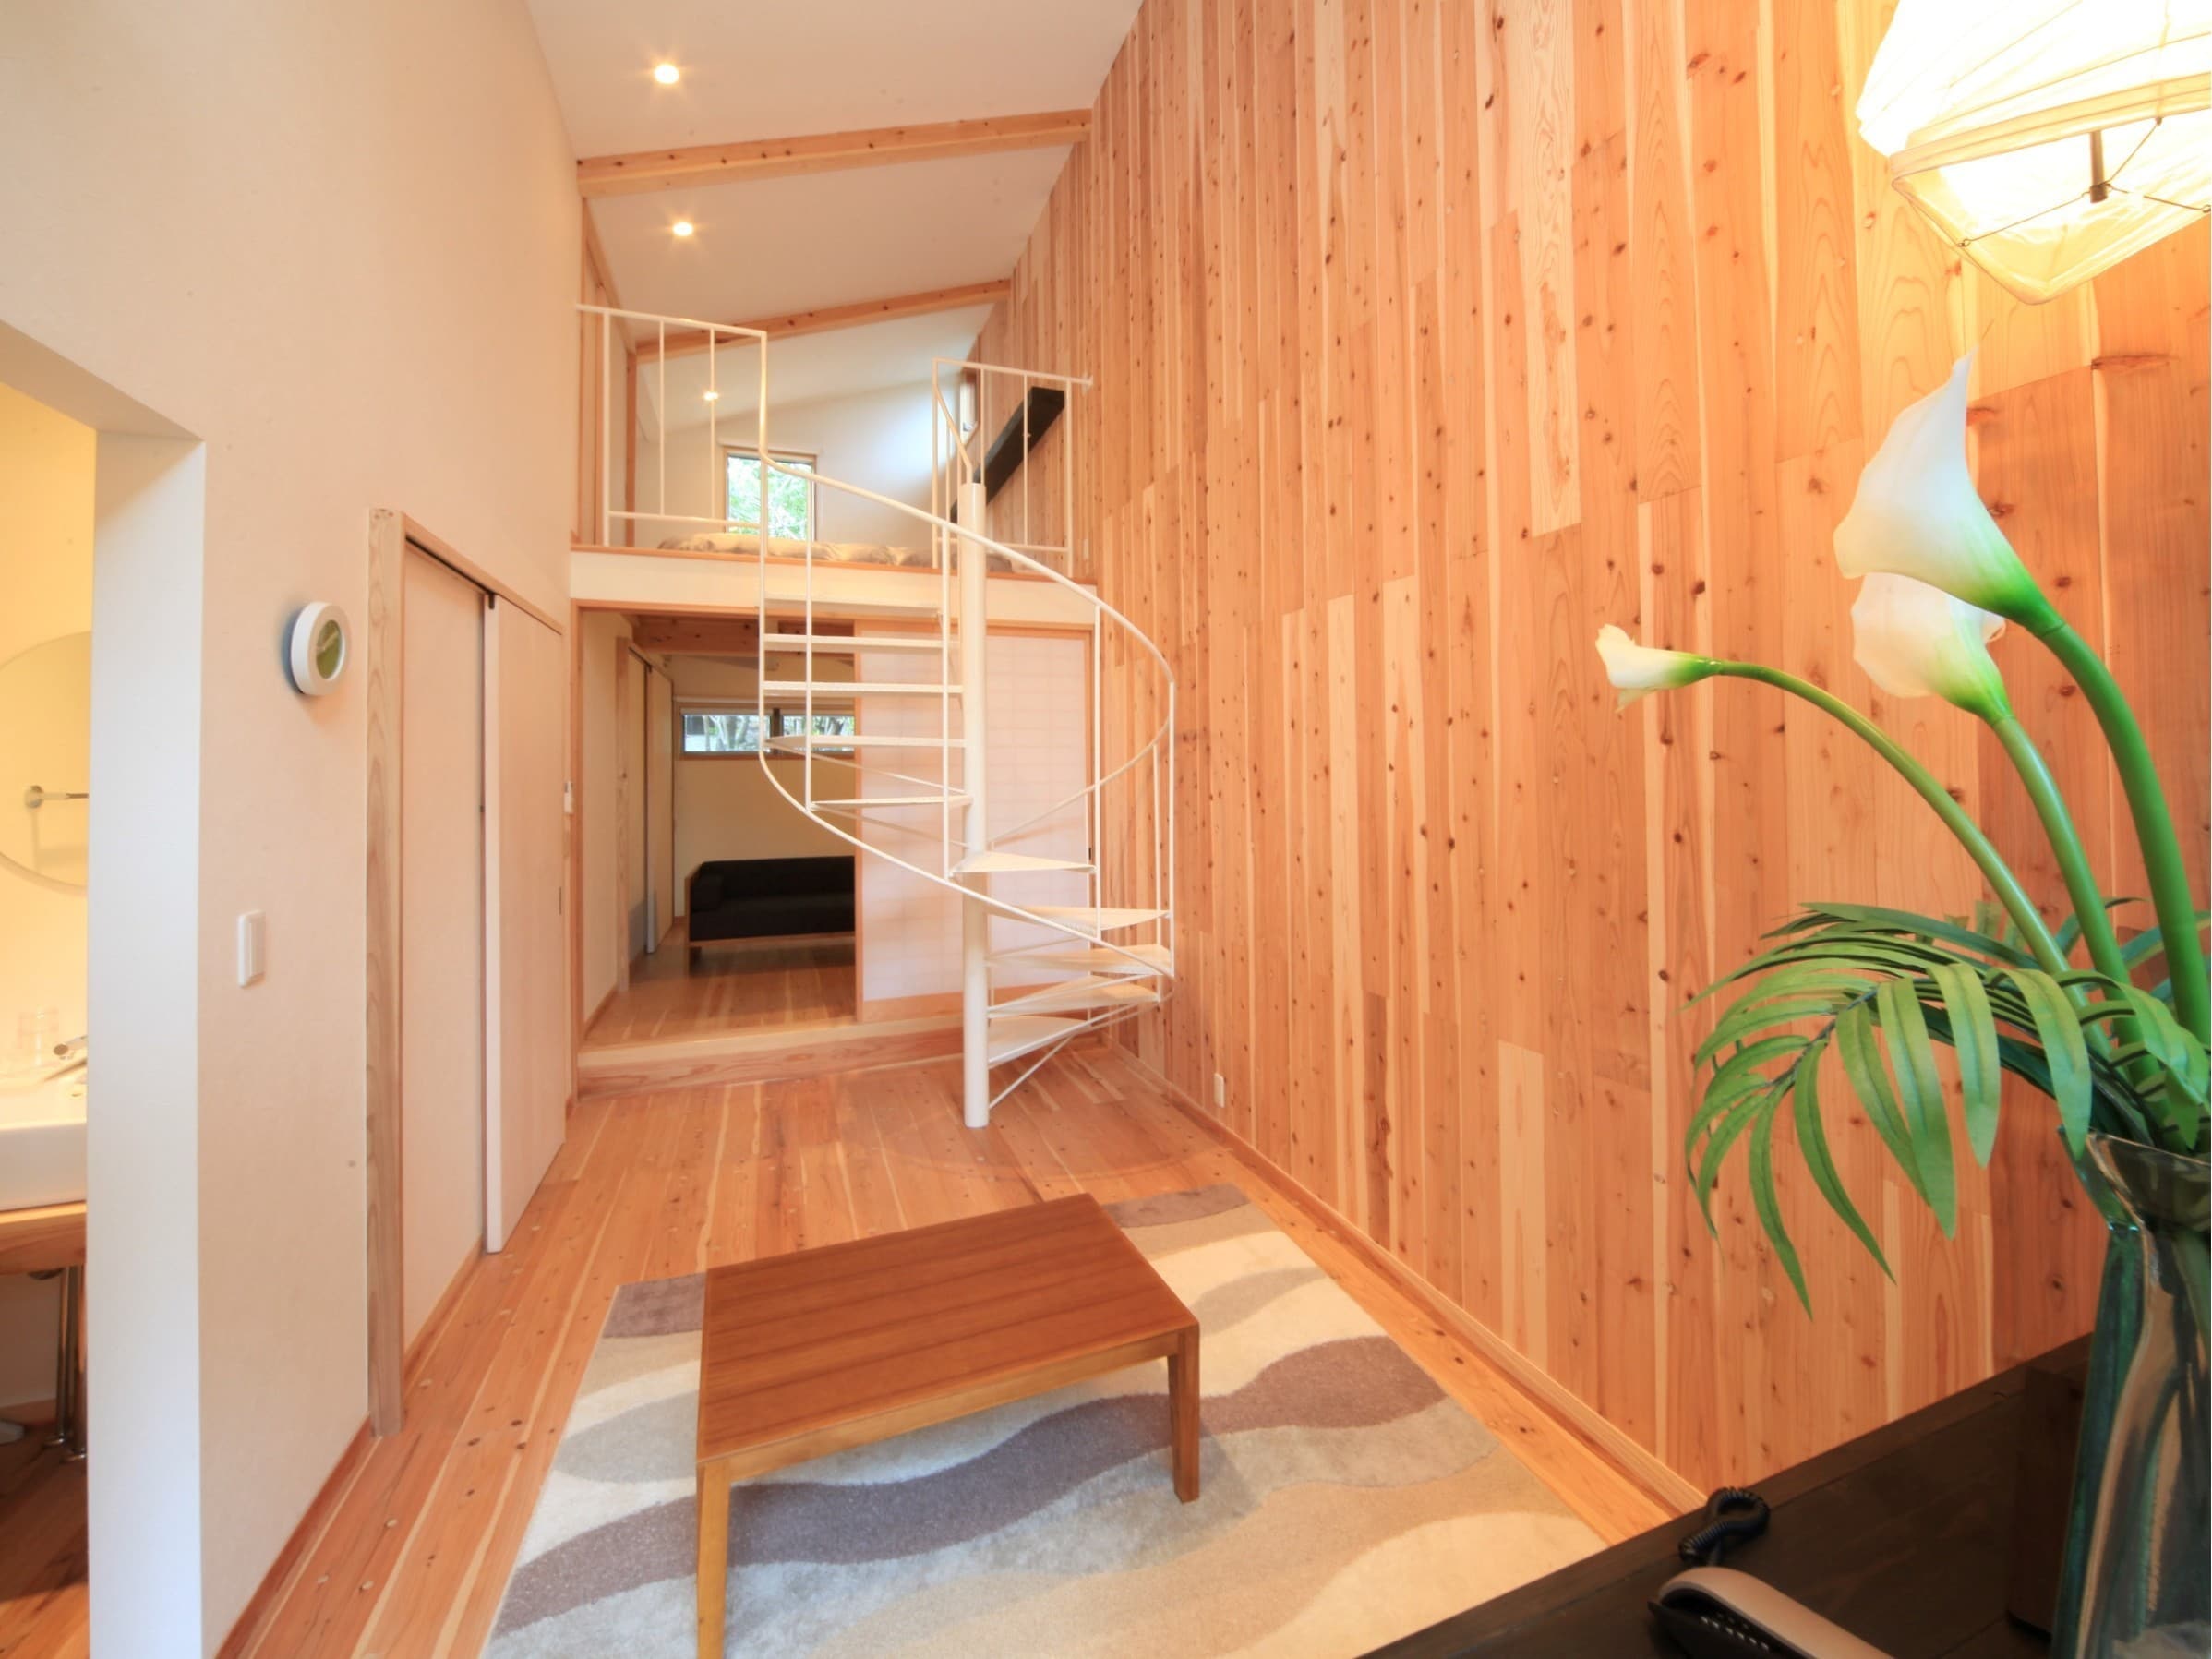 [Recommended for groups] Moegi B, a spacious detached room that can accommodate up to 6 people (example)